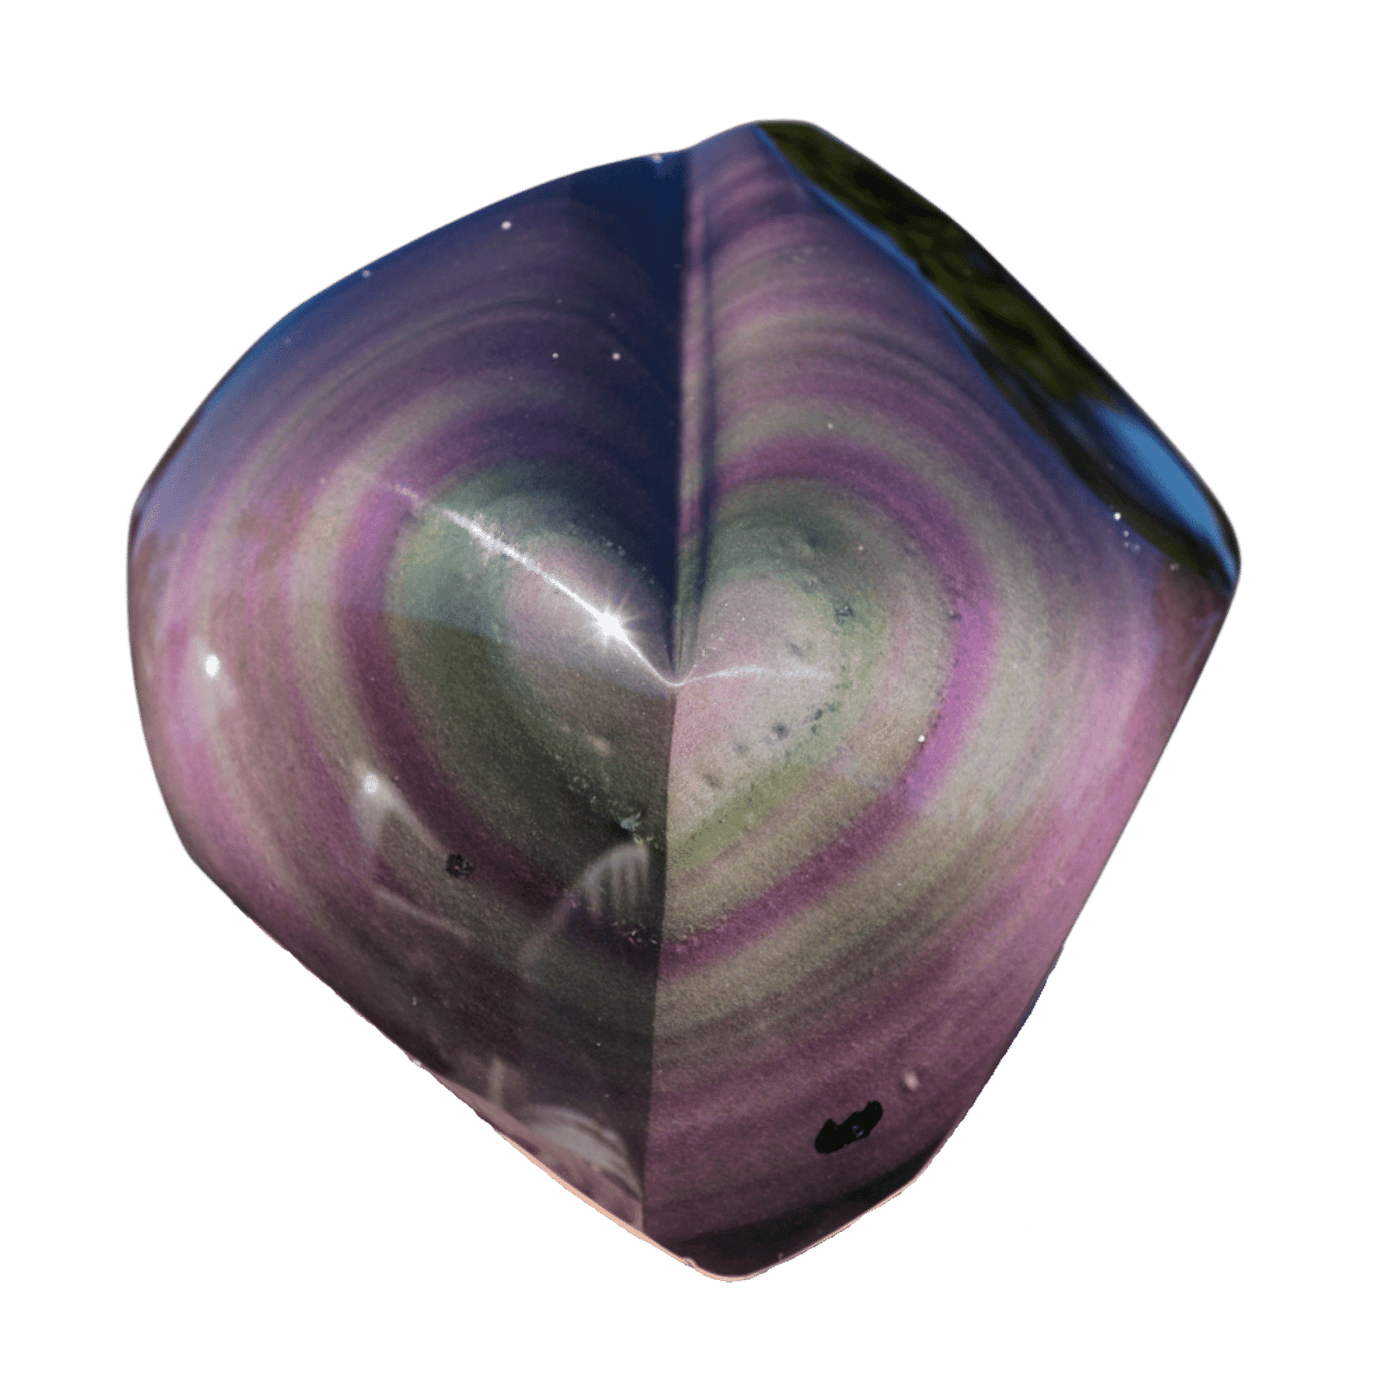 Displaying rainbow sheen of genuine half polished Rainbow Obsidian Heart Crystal by Energy Muse